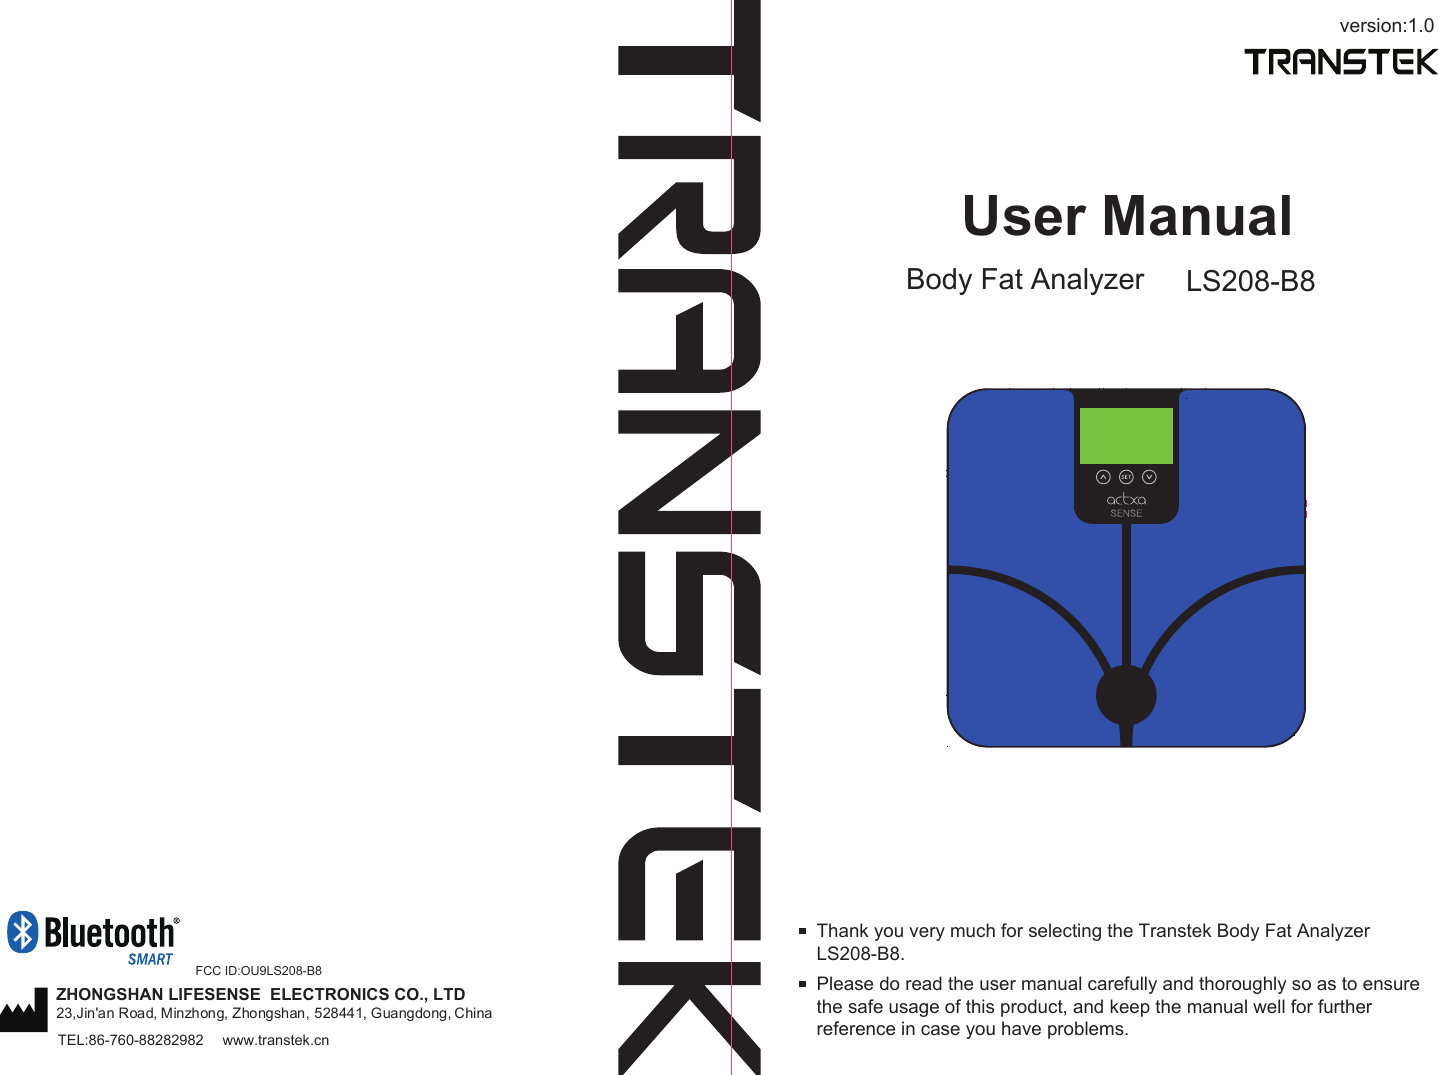 version:1.0User ManualBody Fat Analyzer LS208-B8Please do read the user manual carefully and thoroughly so as to ensure the safe usage of this product, and keep the manual well for further reference in case you have problems.Thank you very much for selecting the Transtek Body Fat Analyzer LS208-B8. TEL:86-760-88282982  www.transtek.cnZHONGSHAN LIFESENSE  ELECTRONICS CO., LTD23,Jin&apos;an Road, Minzhong, Zhongshan, 528441, Guangdong, China FCC ID:OU9LS208-B8